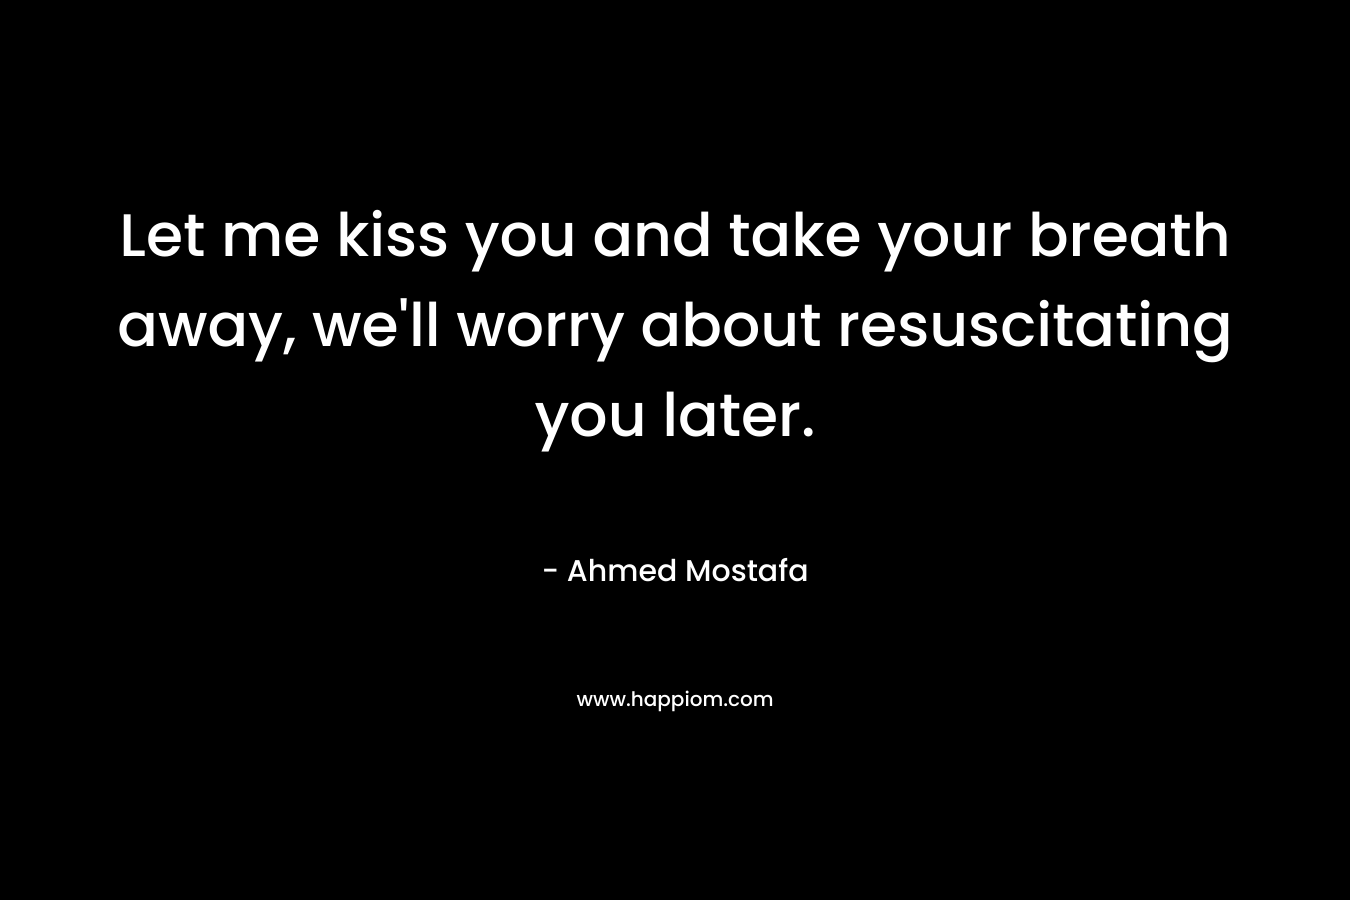 Let me kiss you and take your breath away, we’ll worry about resuscitating you later. – Ahmed Mostafa